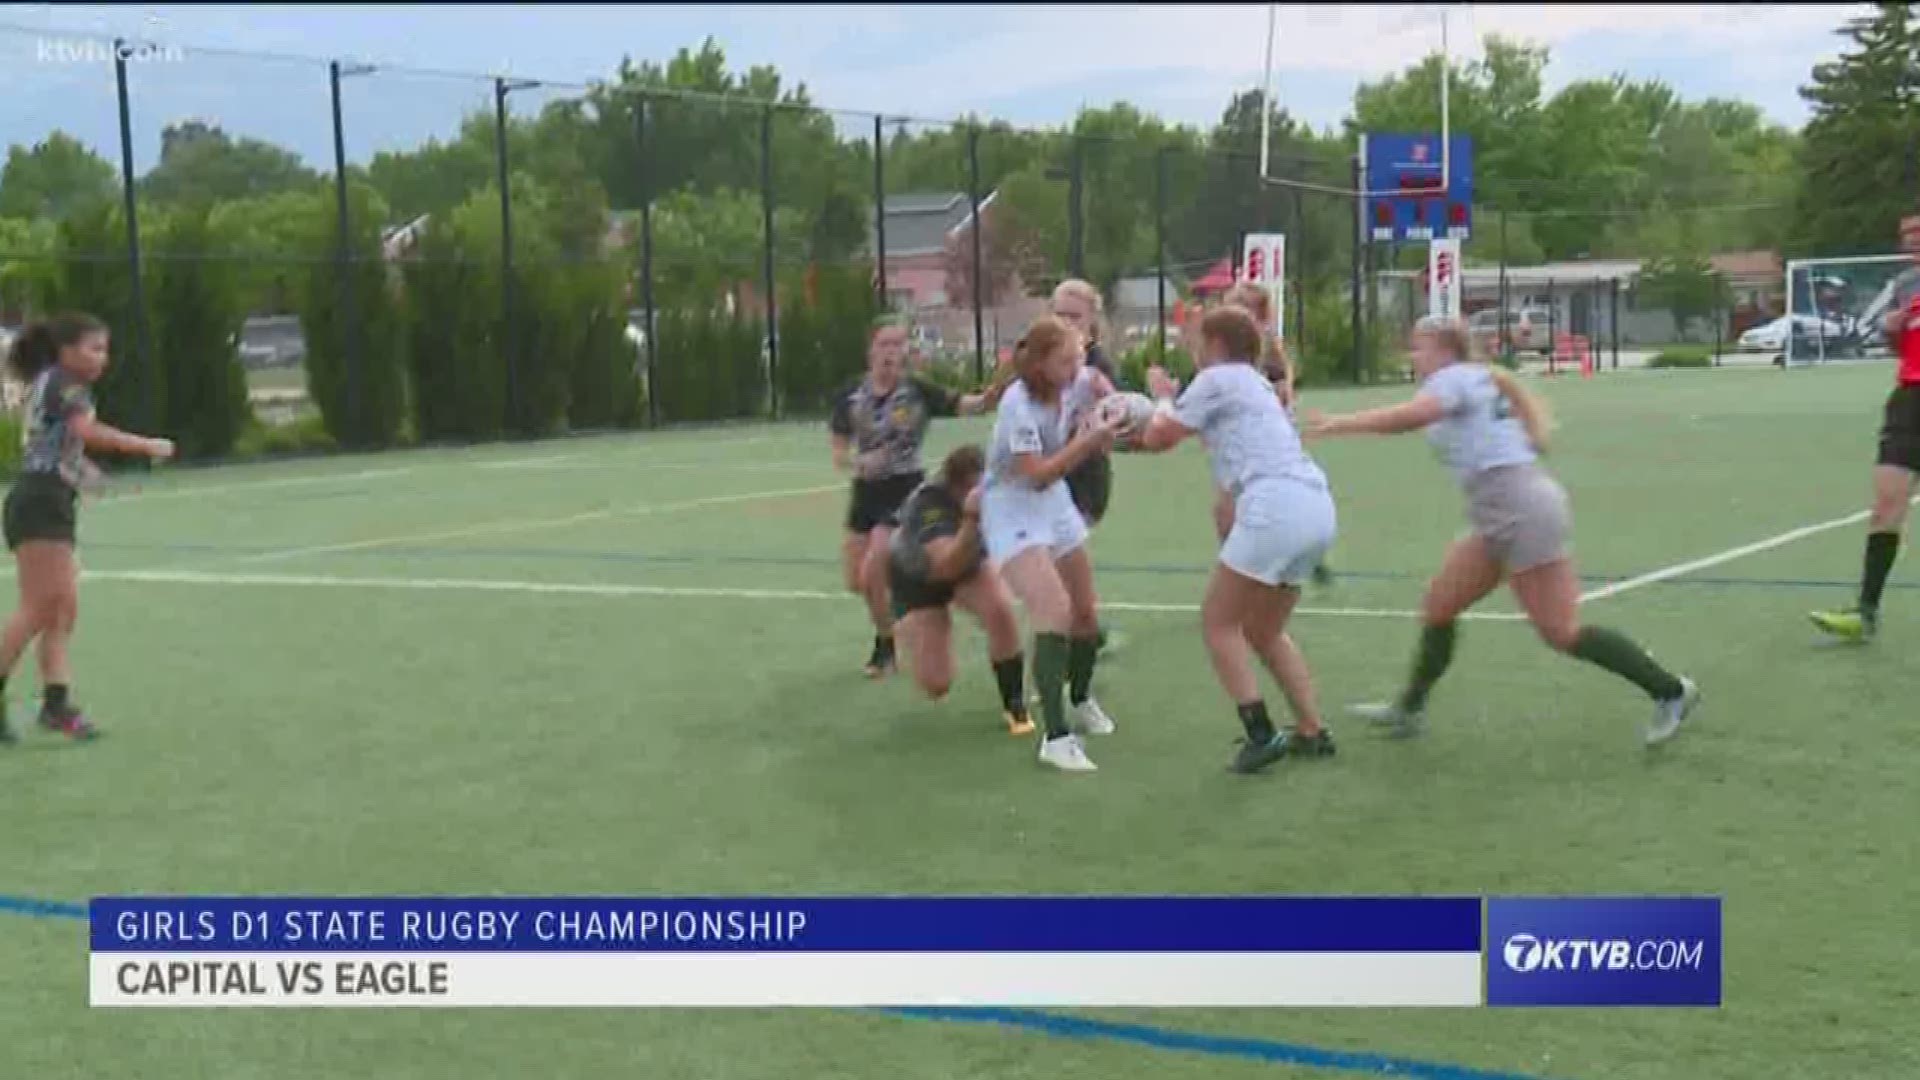 Capital vs. Eagle girls state championship rugby highlights 5/19/2018